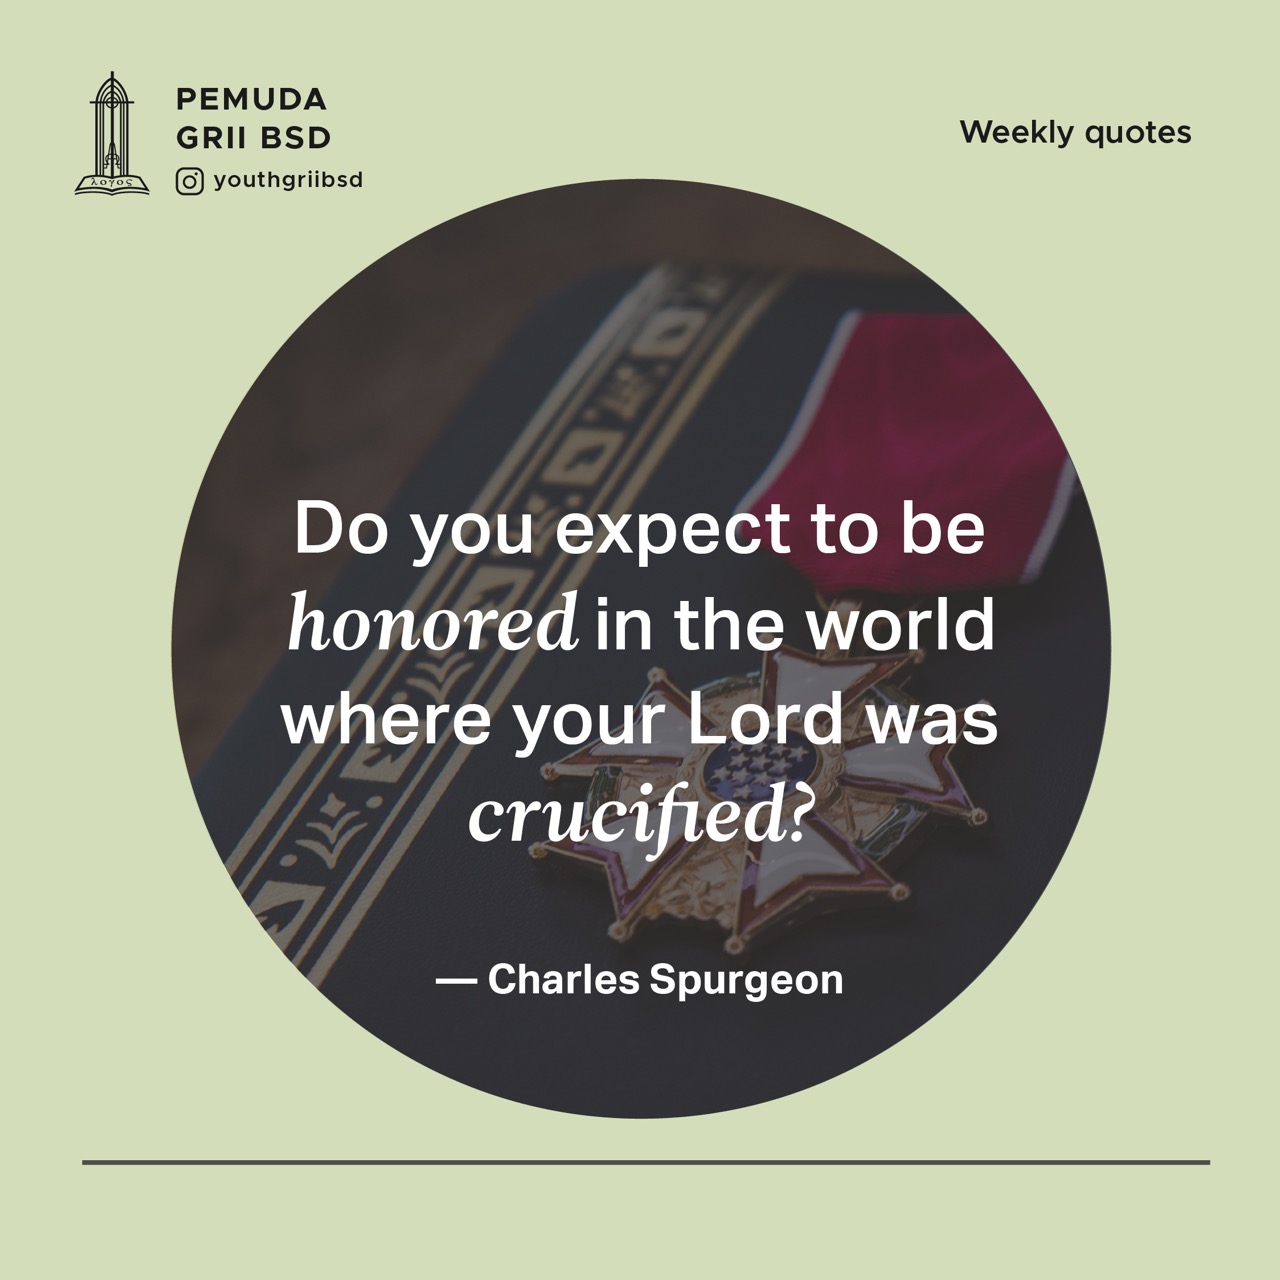 Do you expect to be honored in the world where your Lord was crucified?